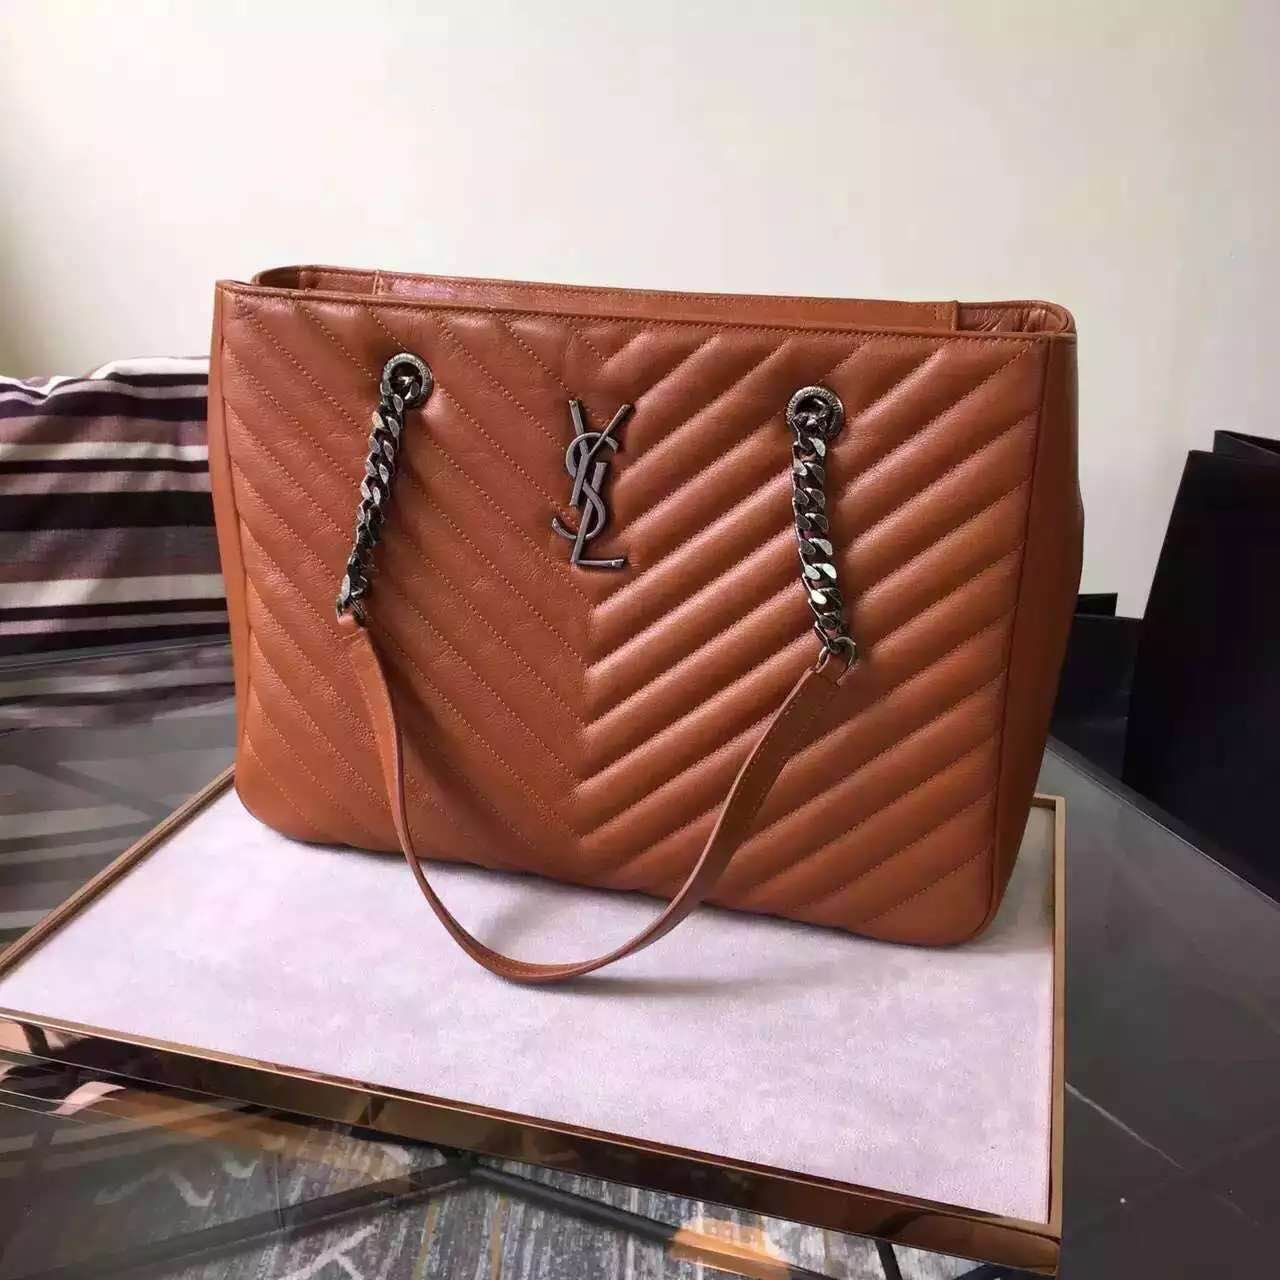 New Arrival!2016 Cheap YSL Out Sale with Free Shipping-Saint Laurent Classic Monogram Shopping Bag in Camel MATELASSÉ Leather